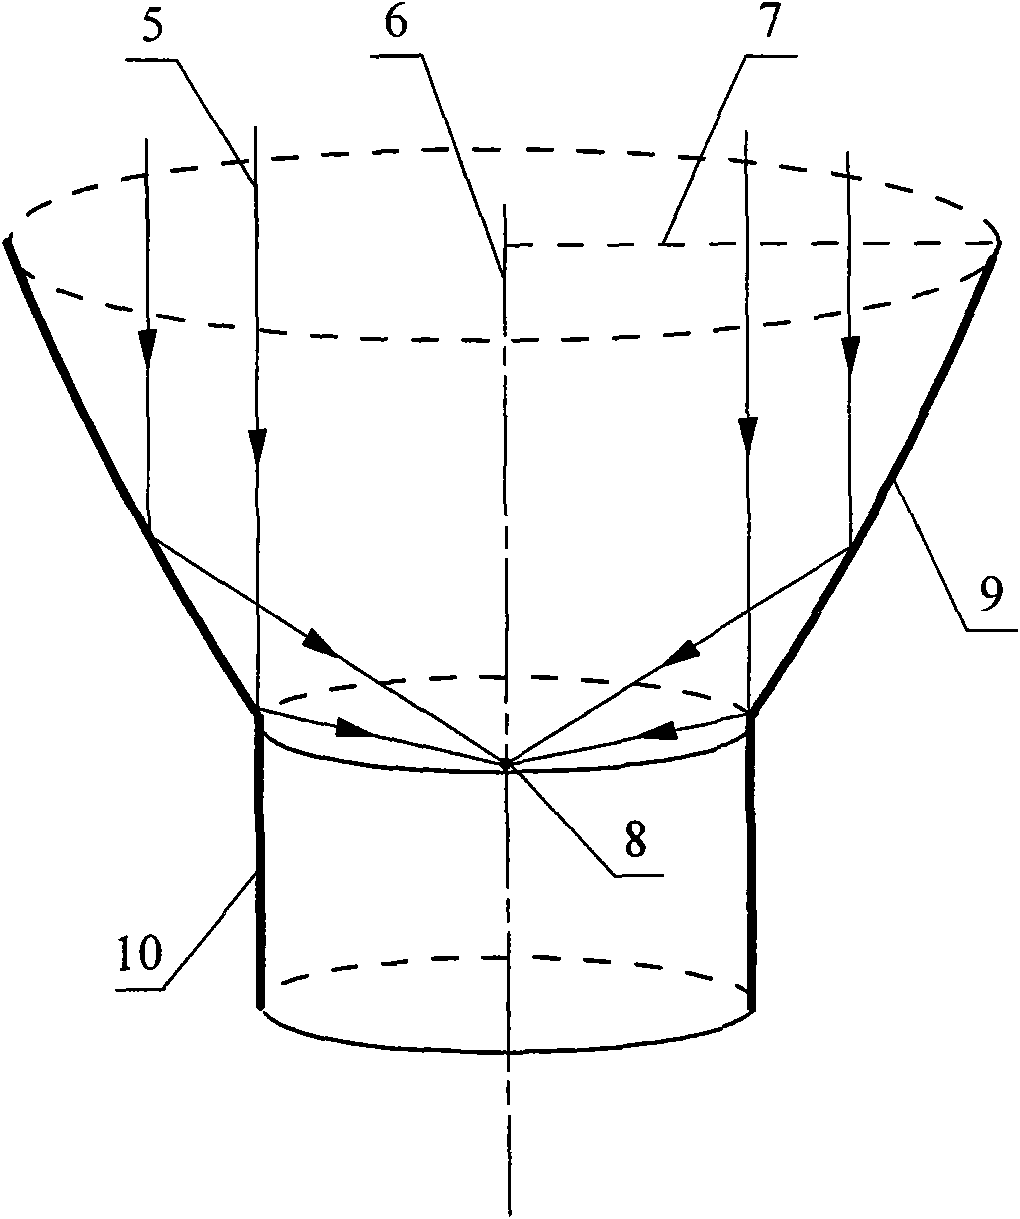 Composite device of light funnel light concentrating photovoltaic power generation and wind power generation